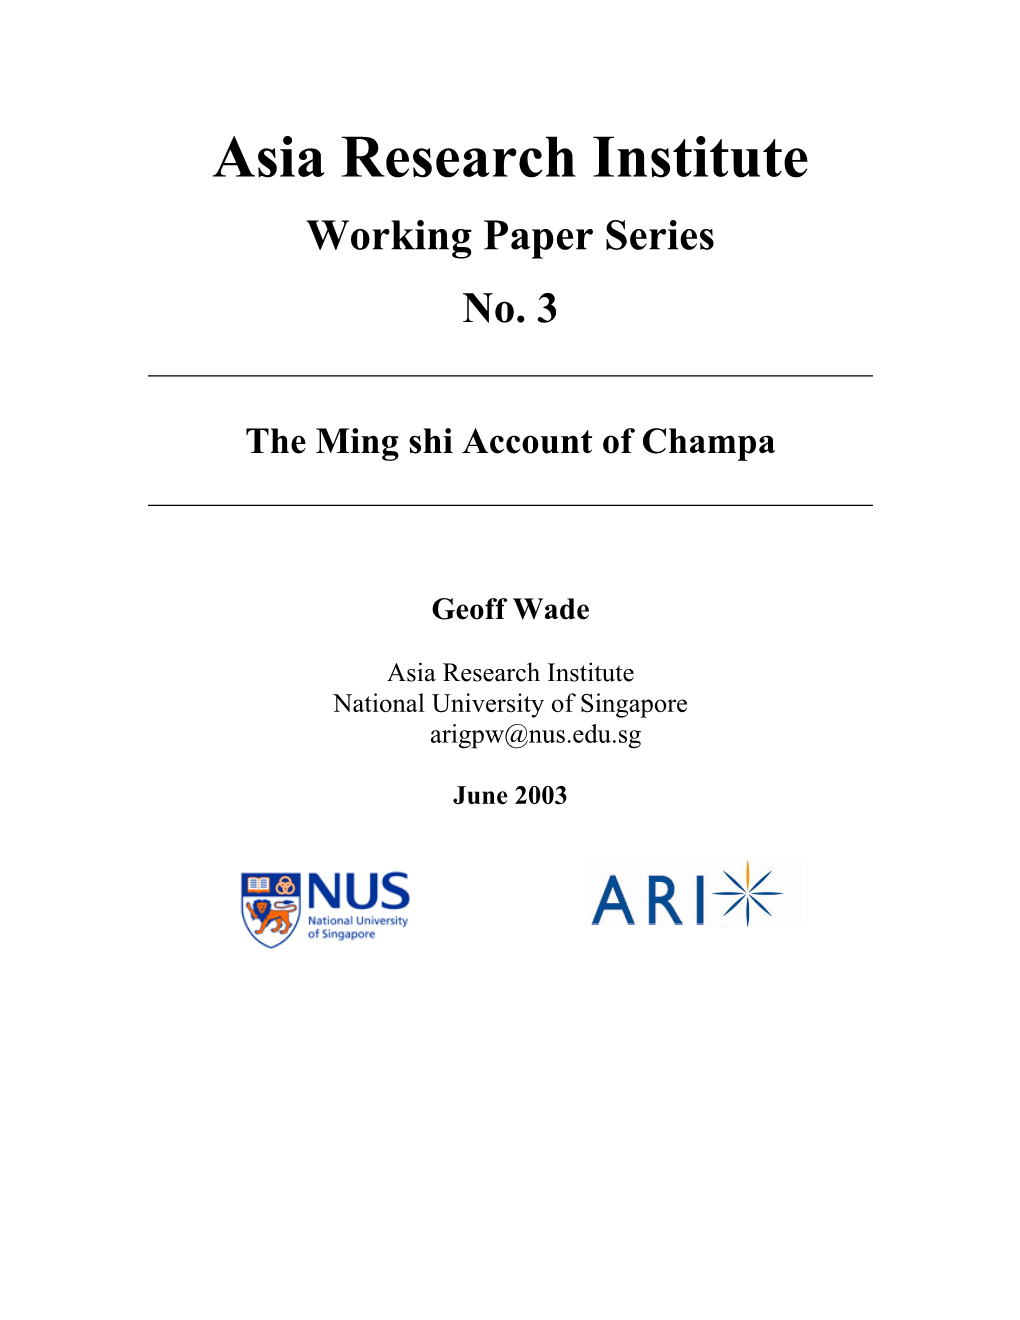 The Ming Shi Account of Champa